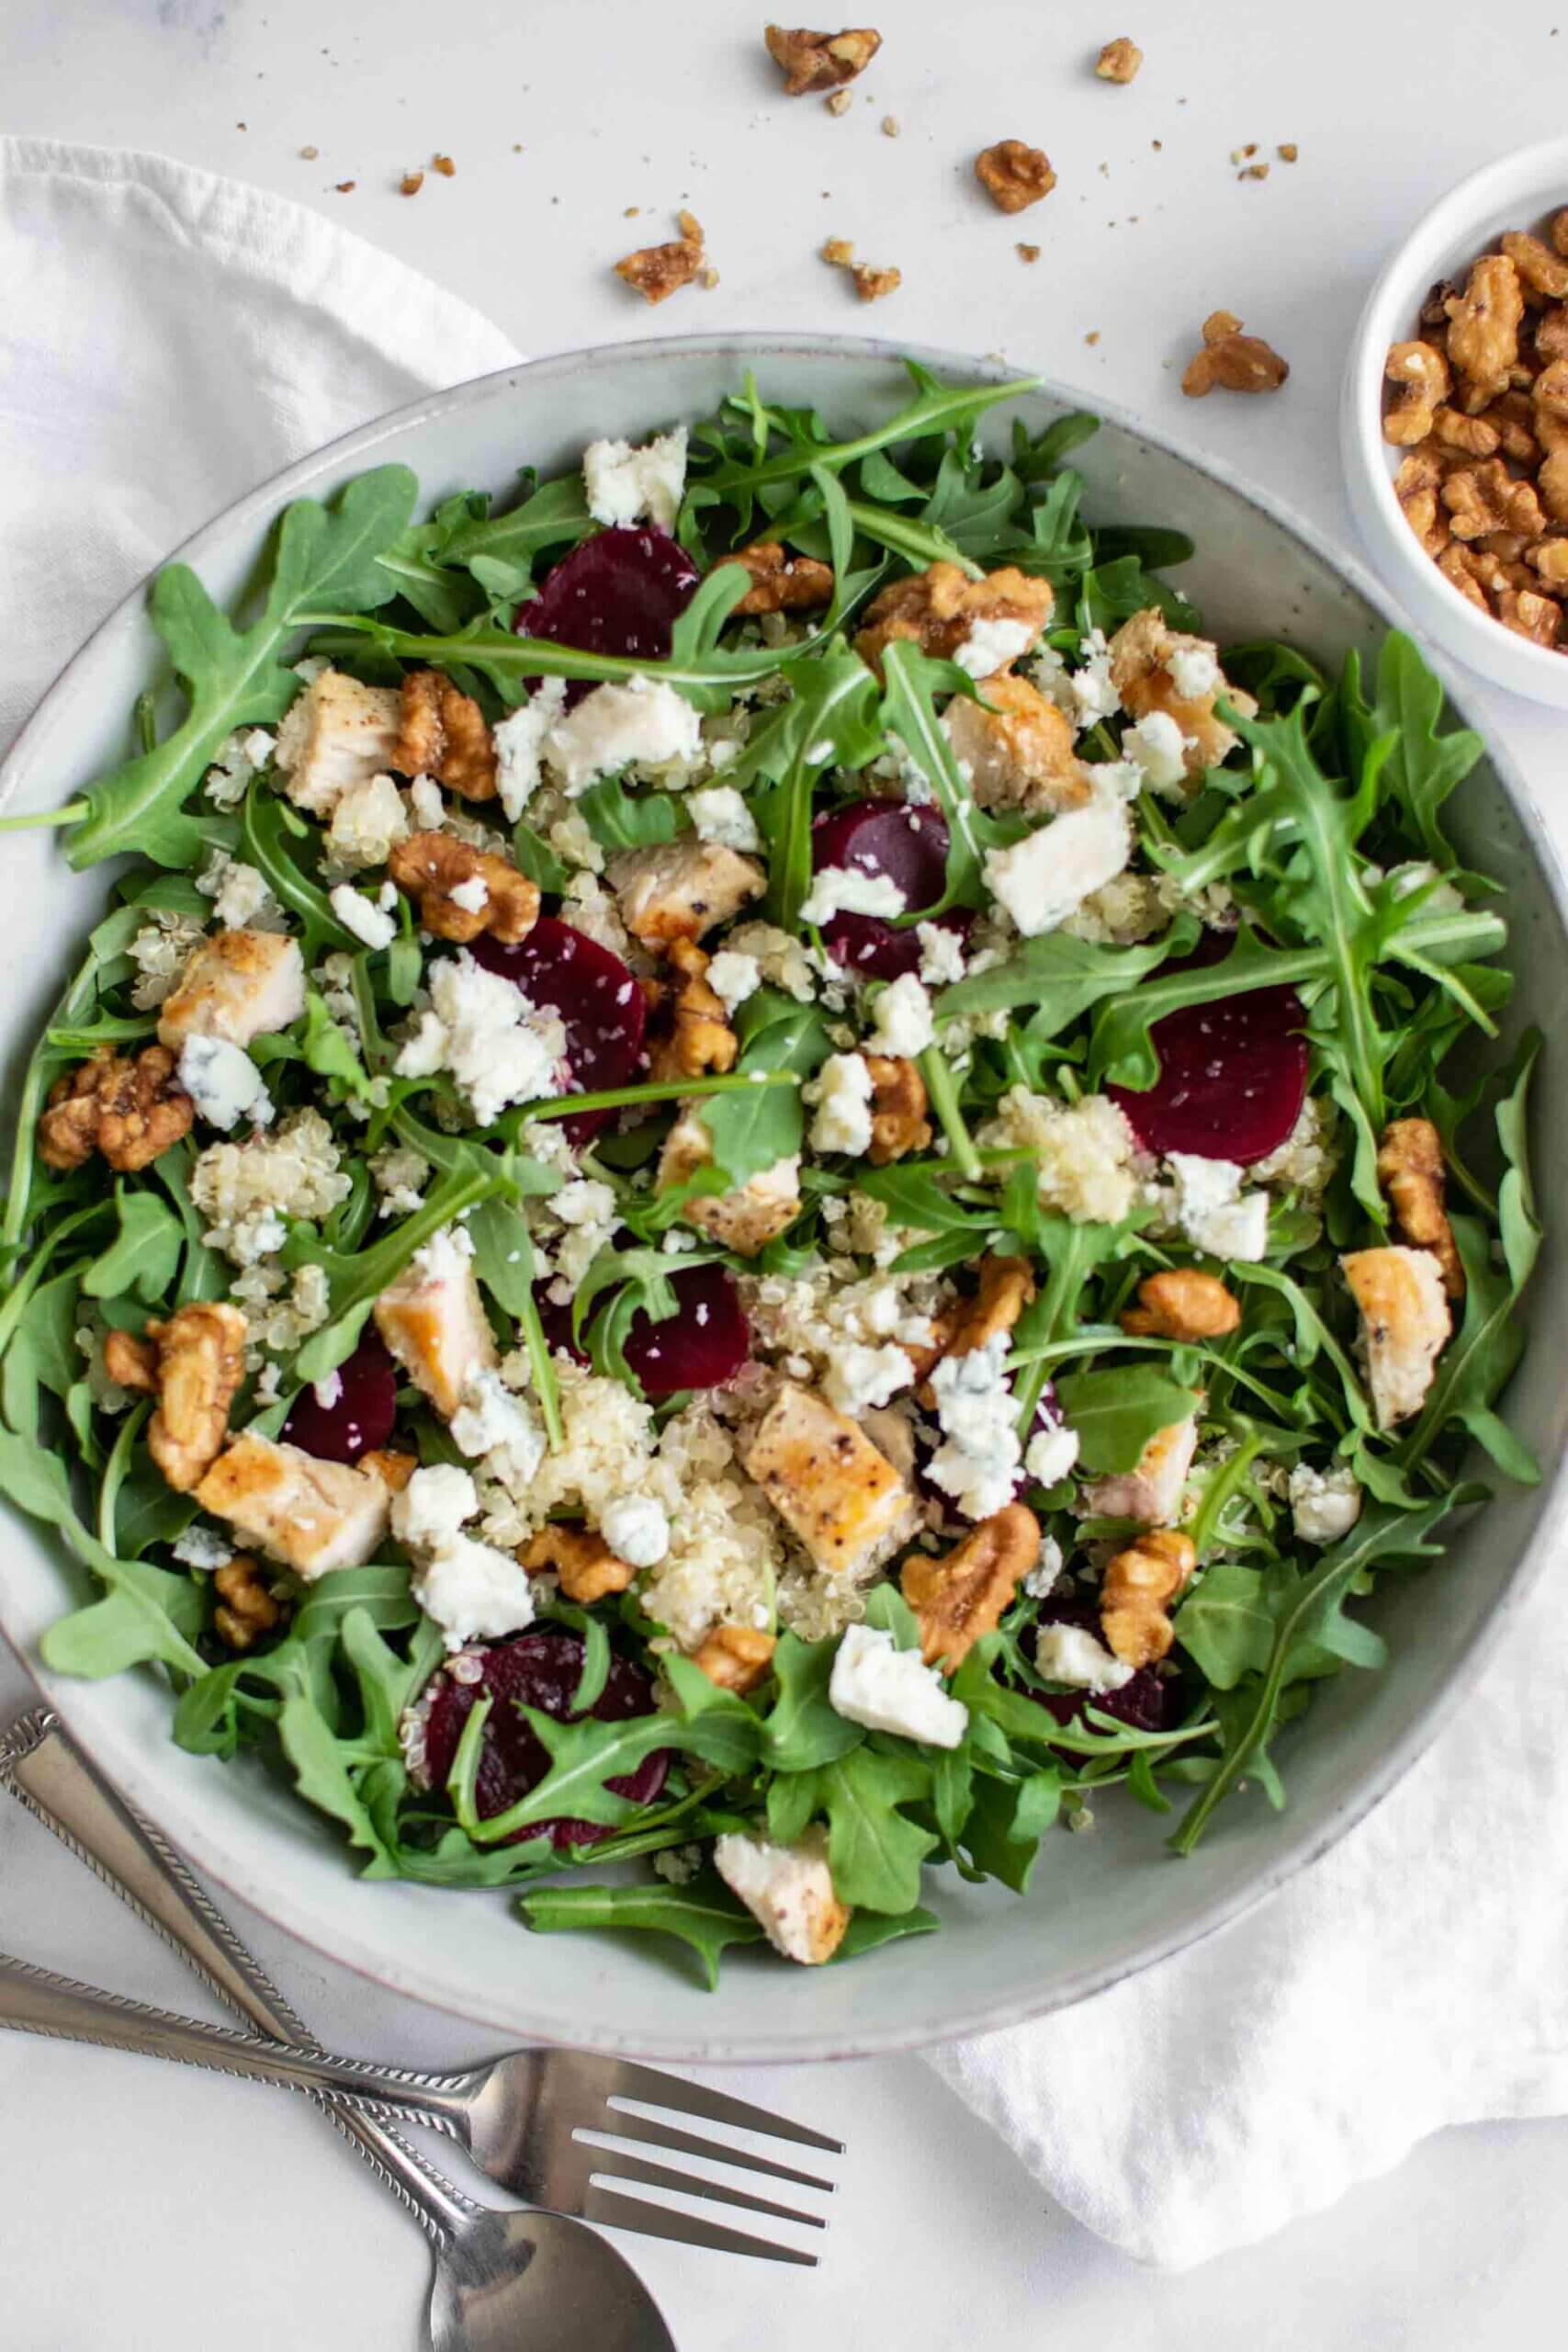 Quinoa and arugula salad in a bowl with beets, chicken and gorgonzola cheese